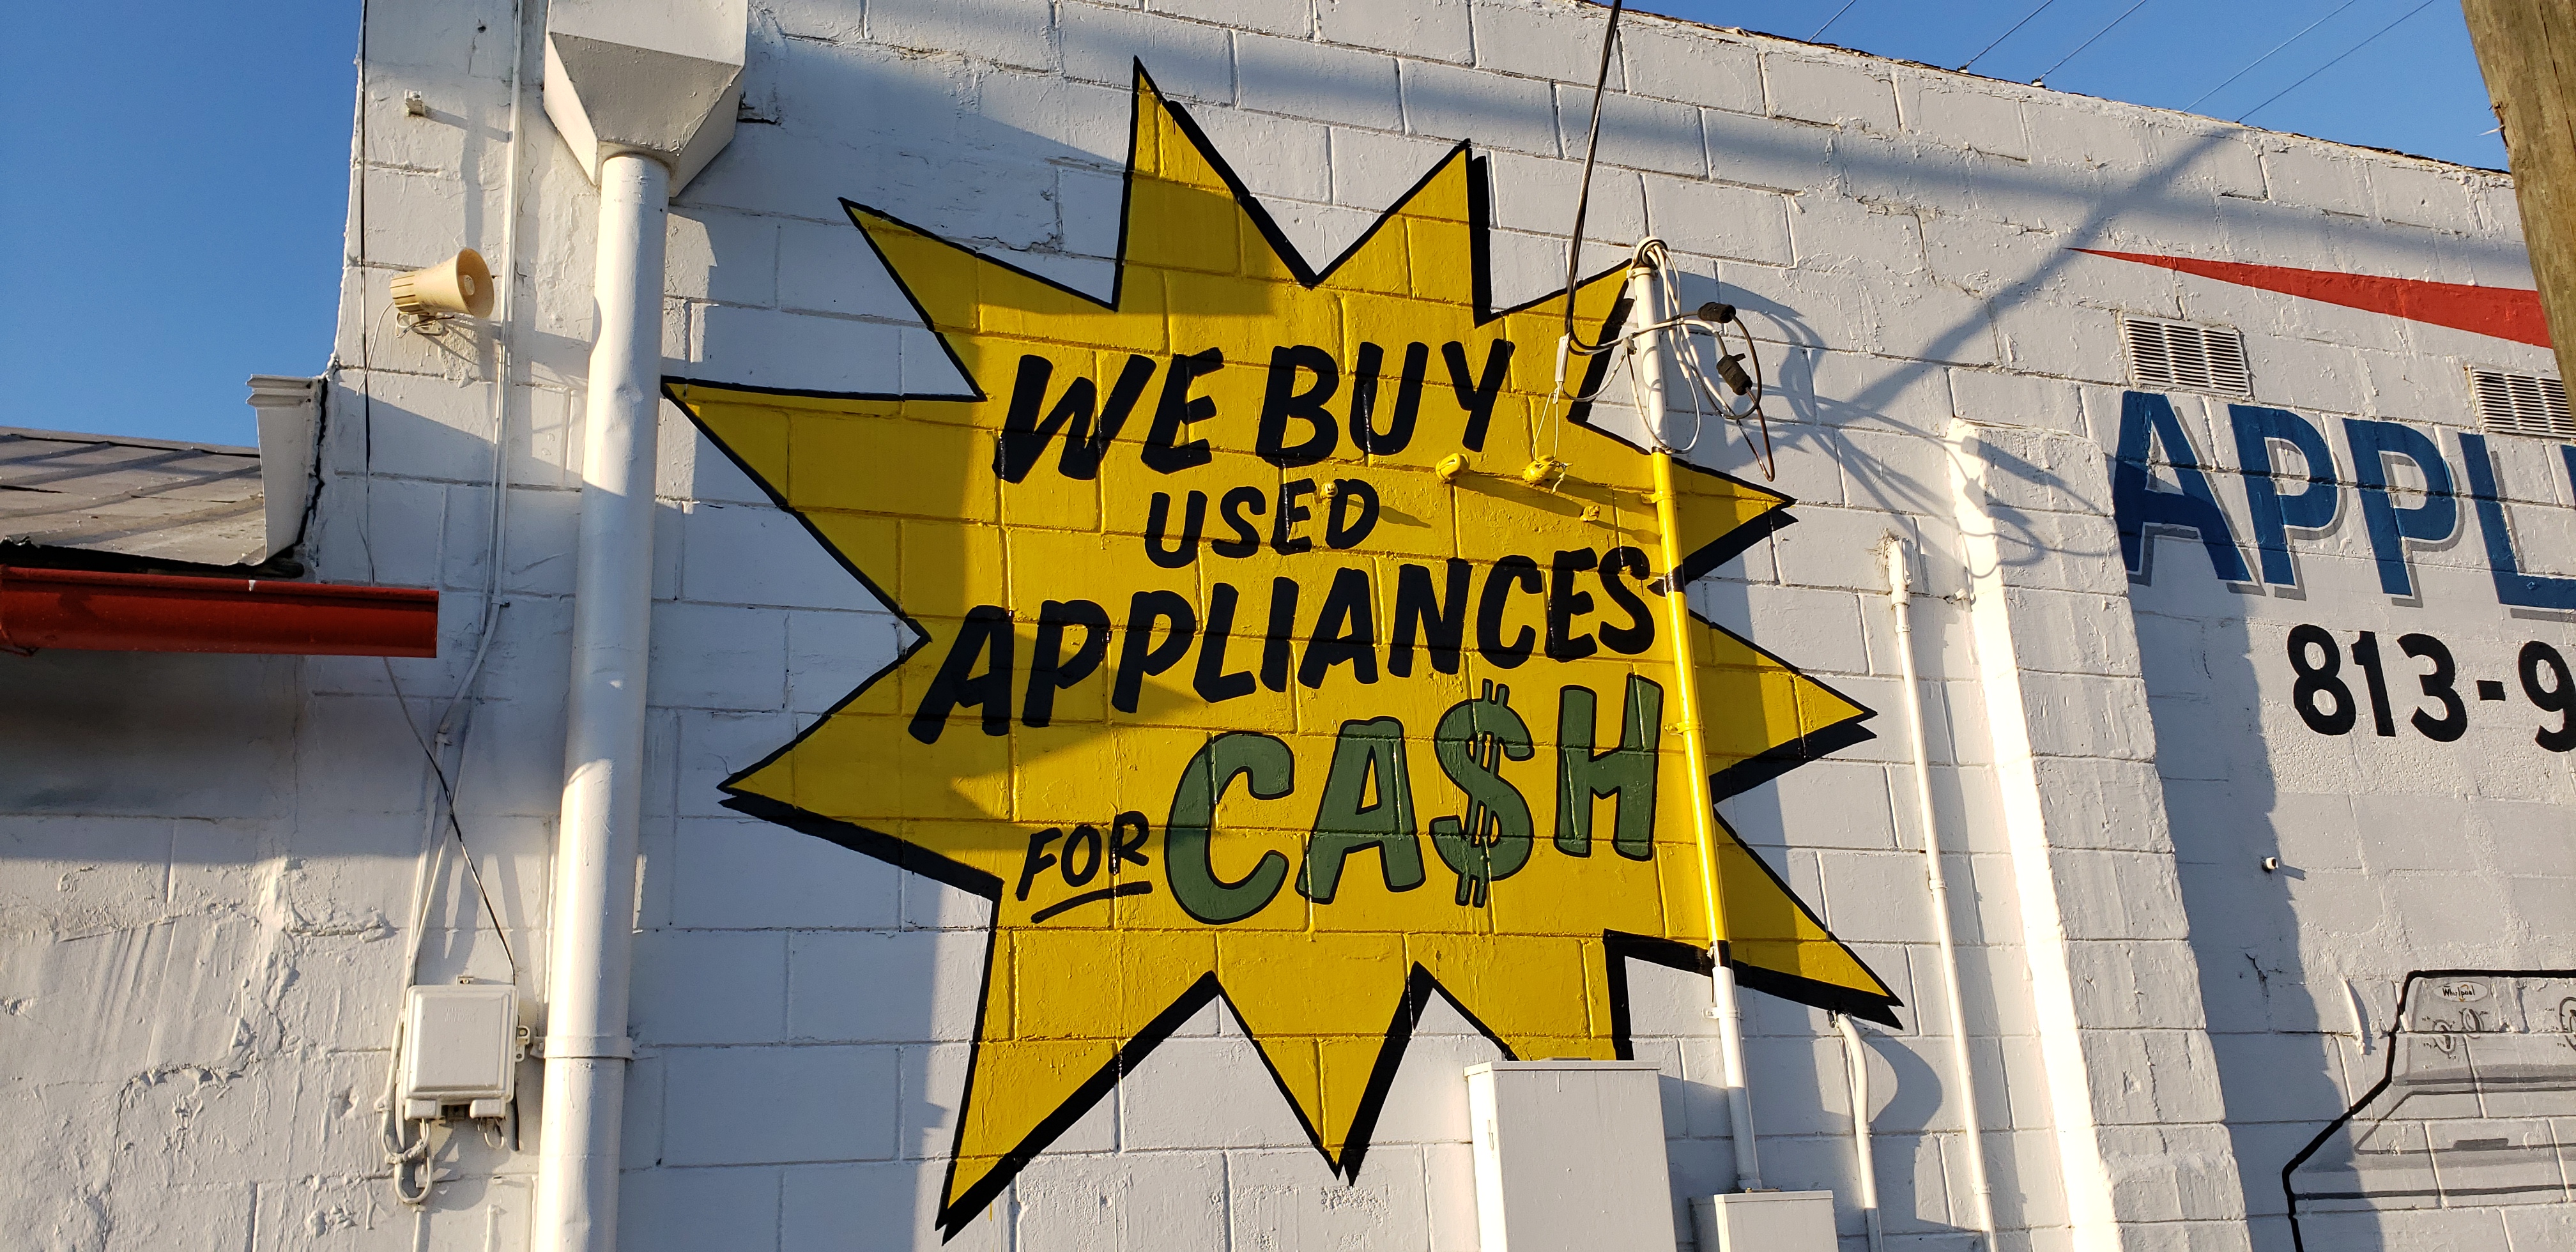 We buy used appliances for cash